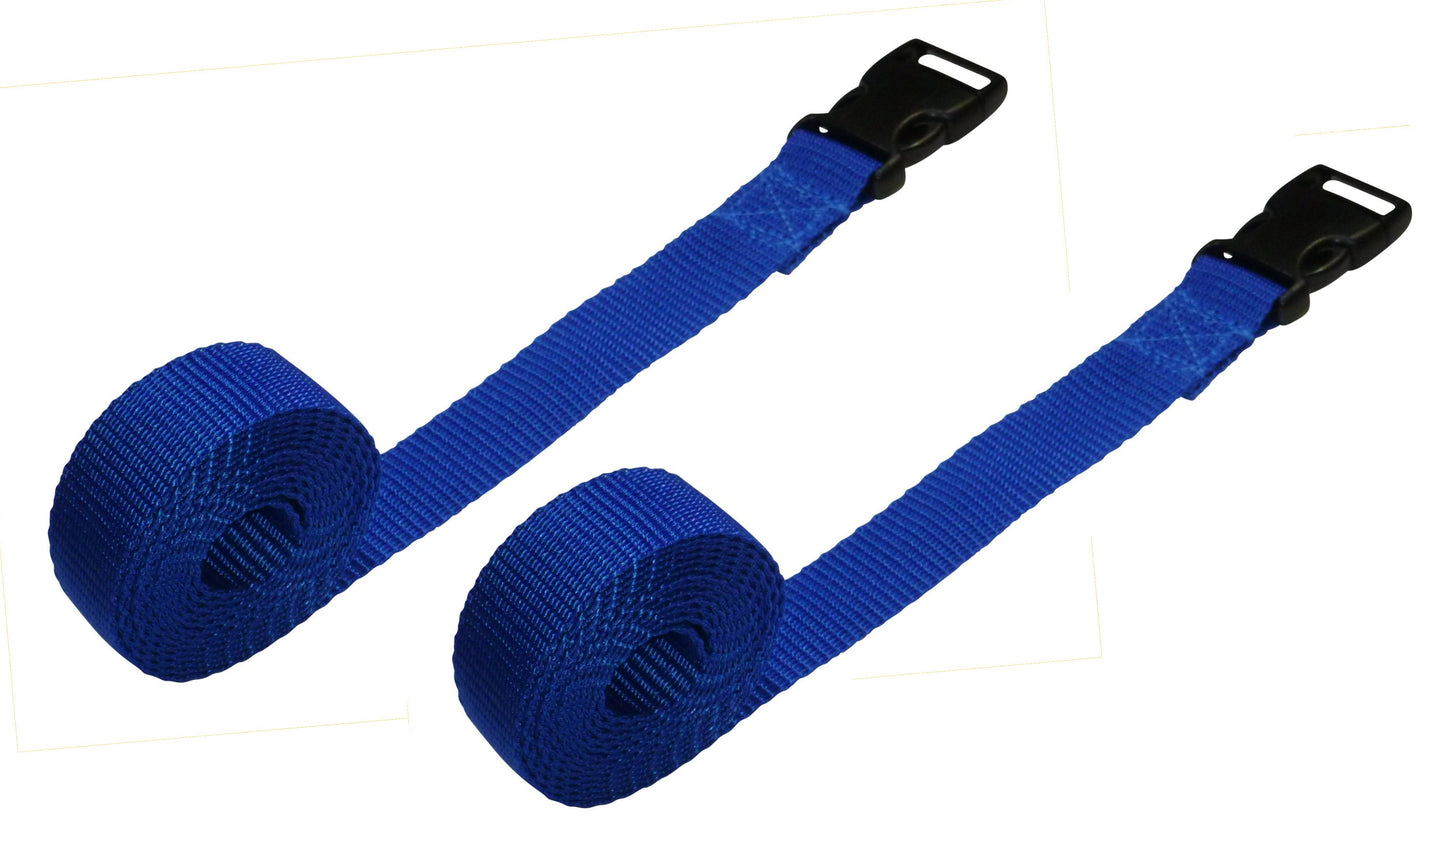 Benristraps 25mm Webbing Strap with Quick Release Buckle (Pair) in blue